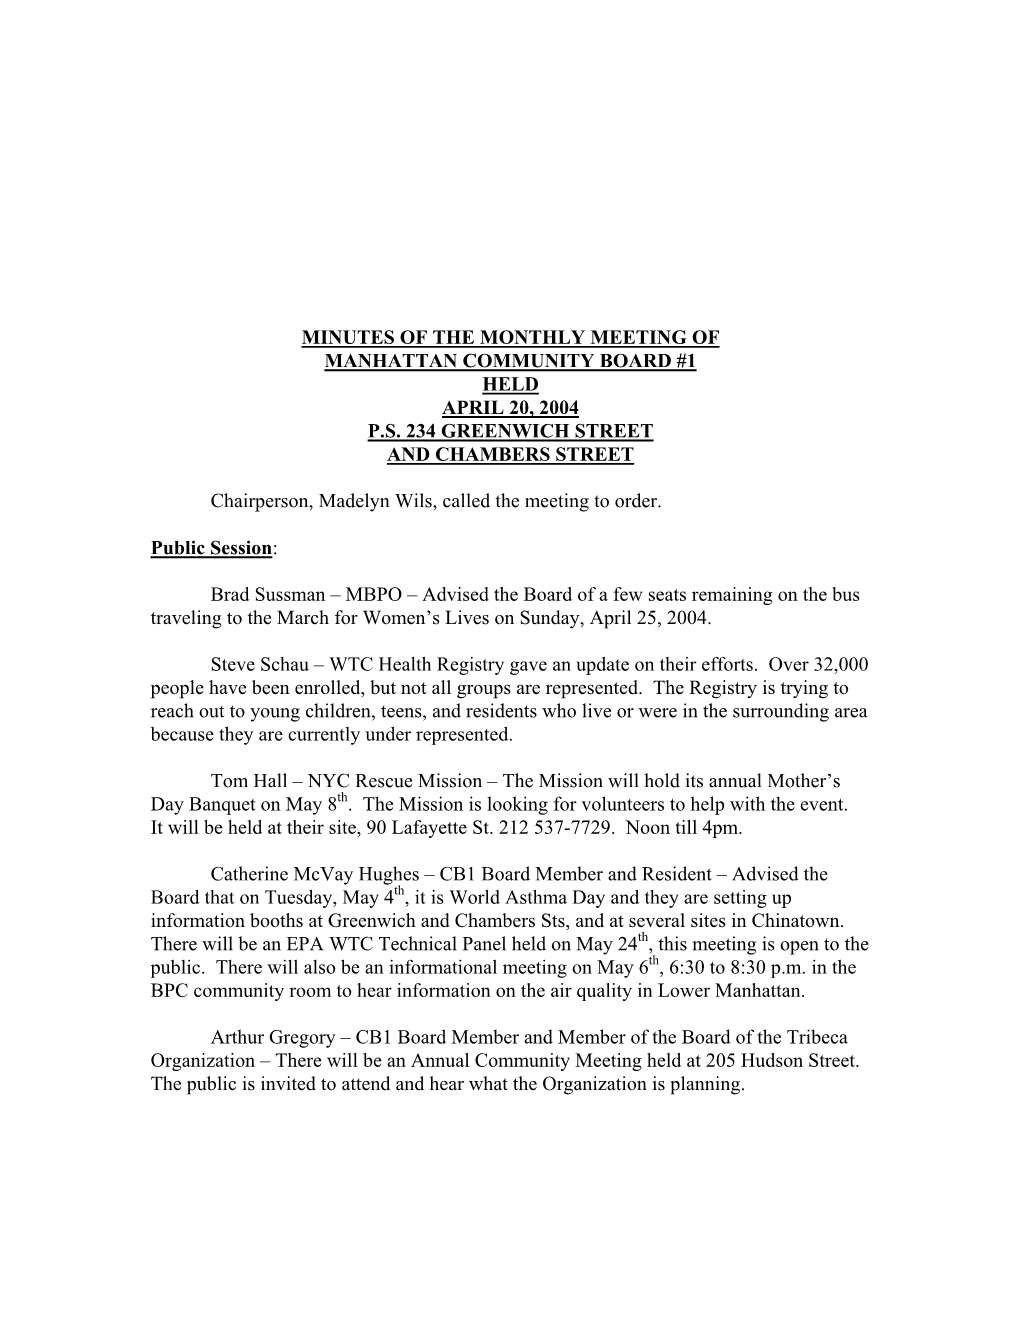 Minutes of the Monthly Meeting of Manhattan Community Board #1 Held April 20, 2004 P.S. 234 Greenwich Street and Chambers Street